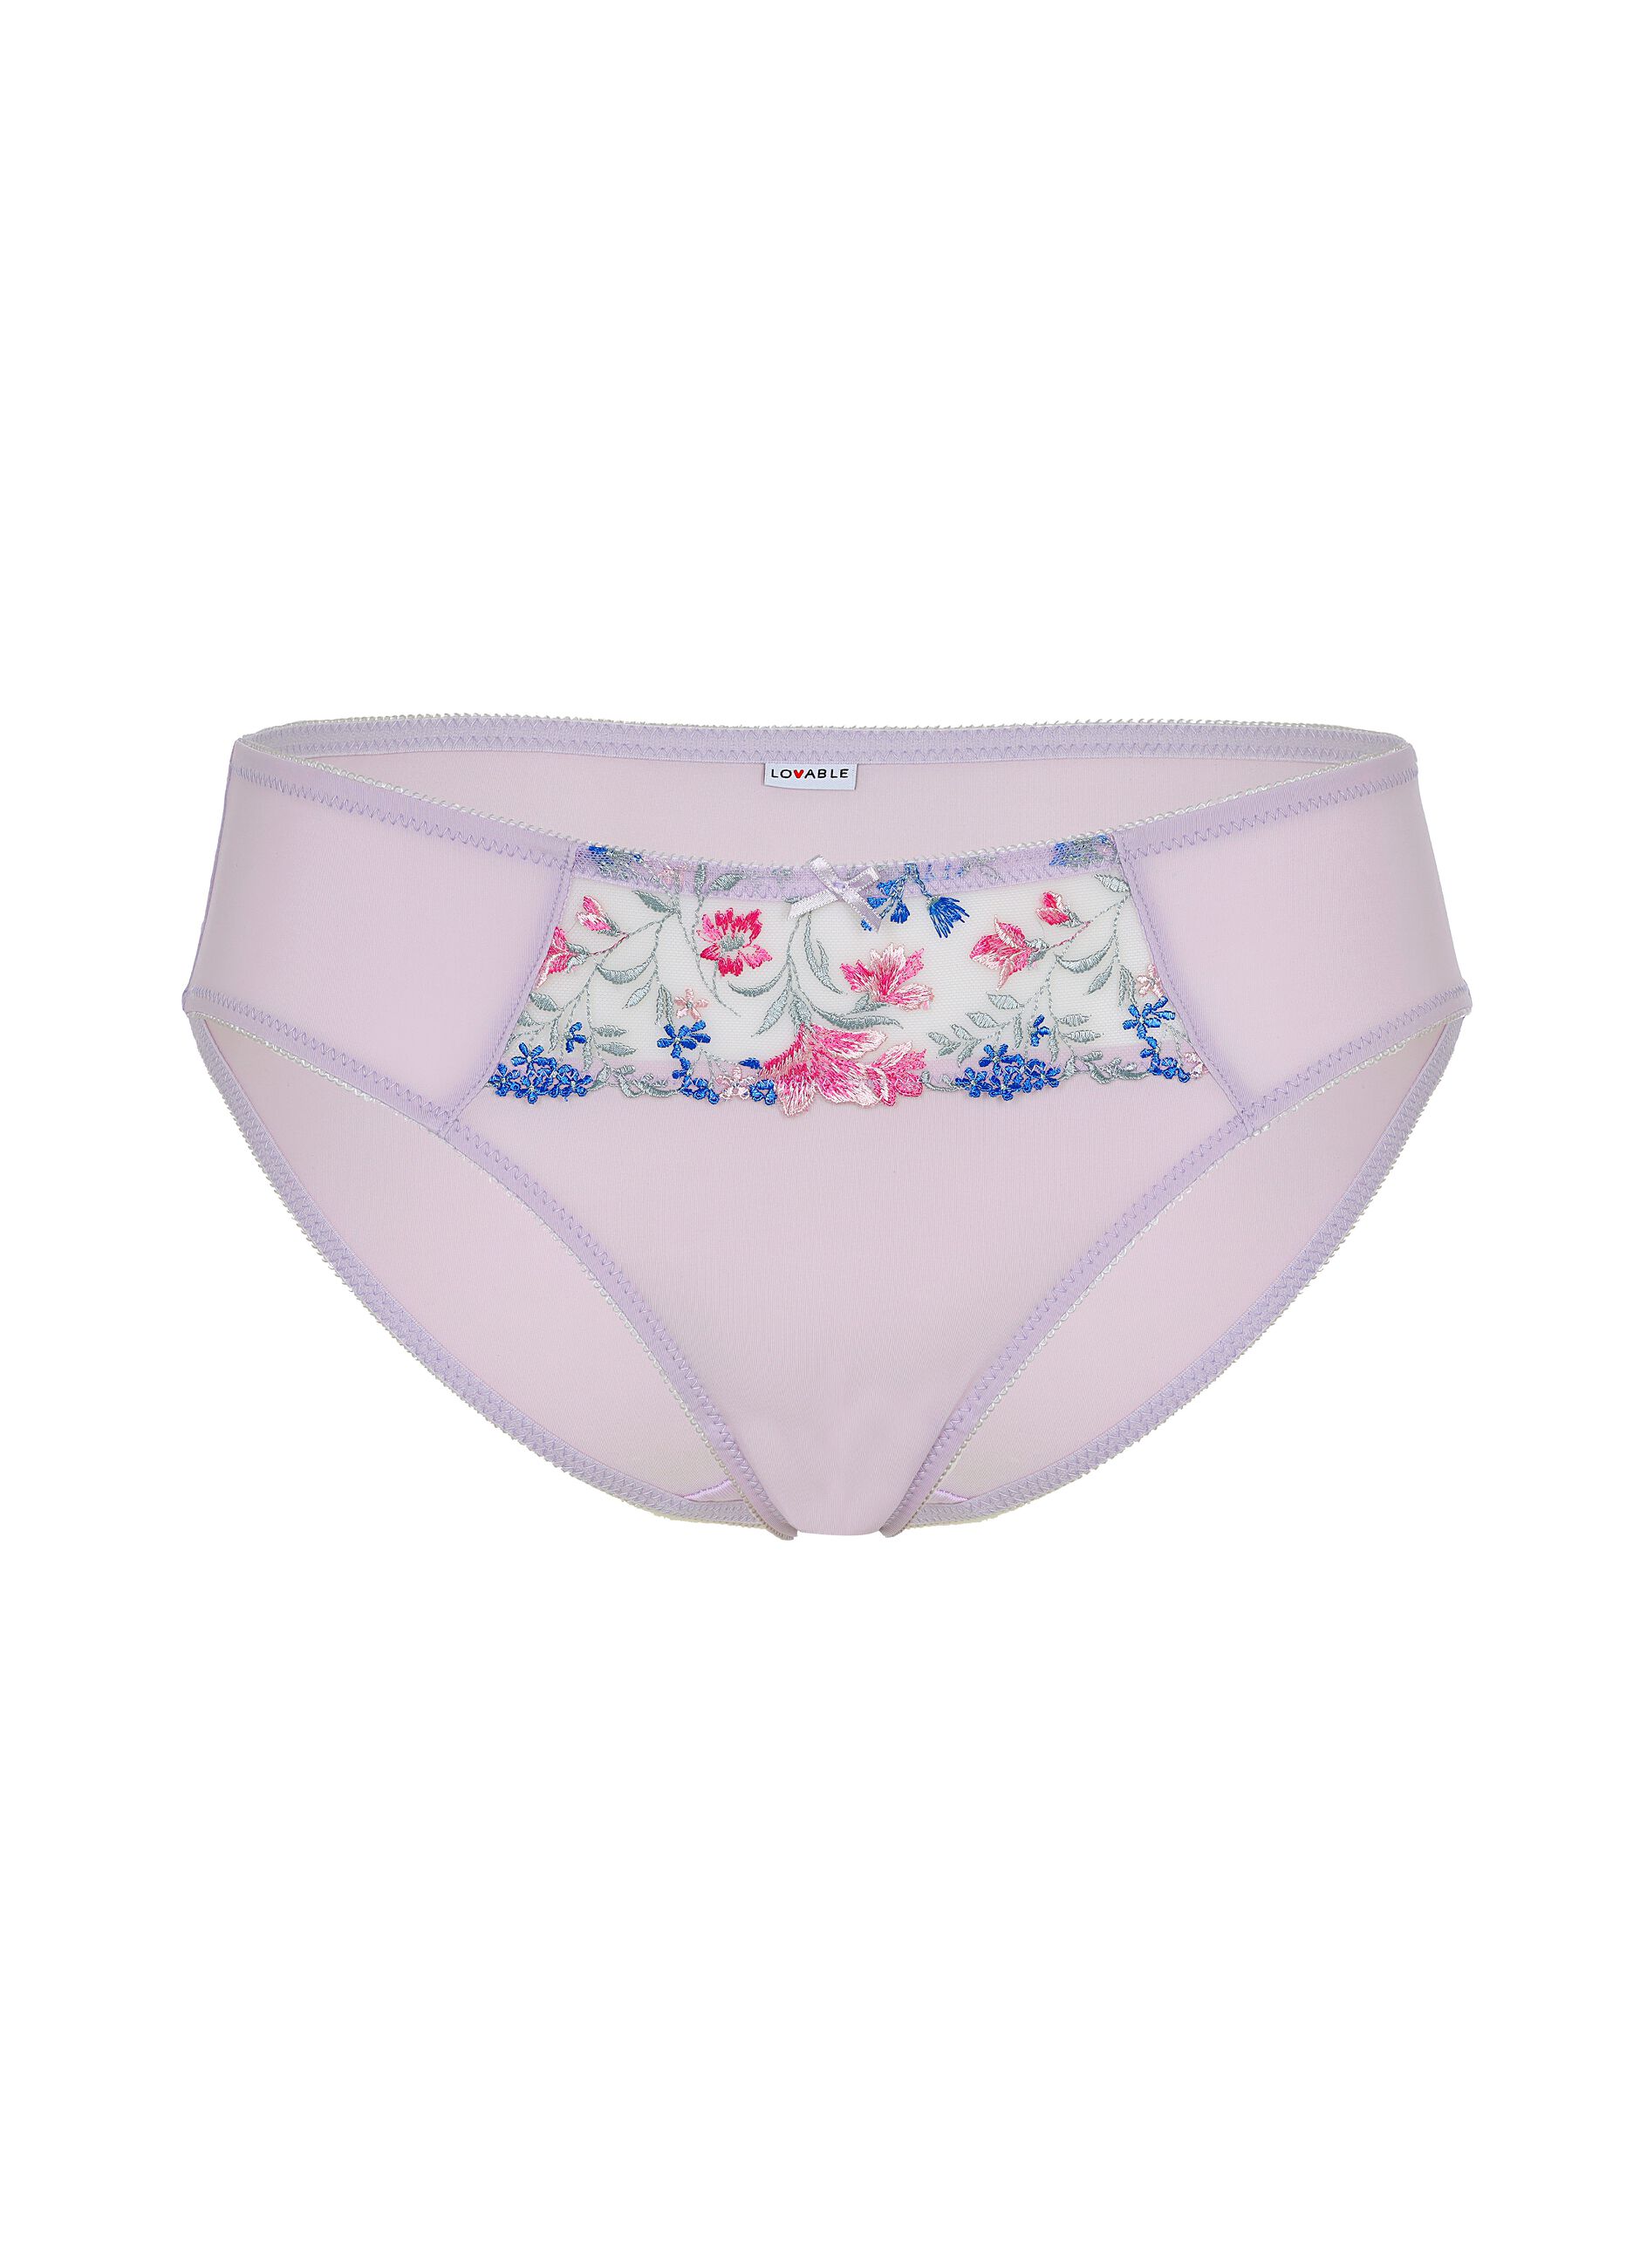 Embroidered lace briefs with floral embroidery